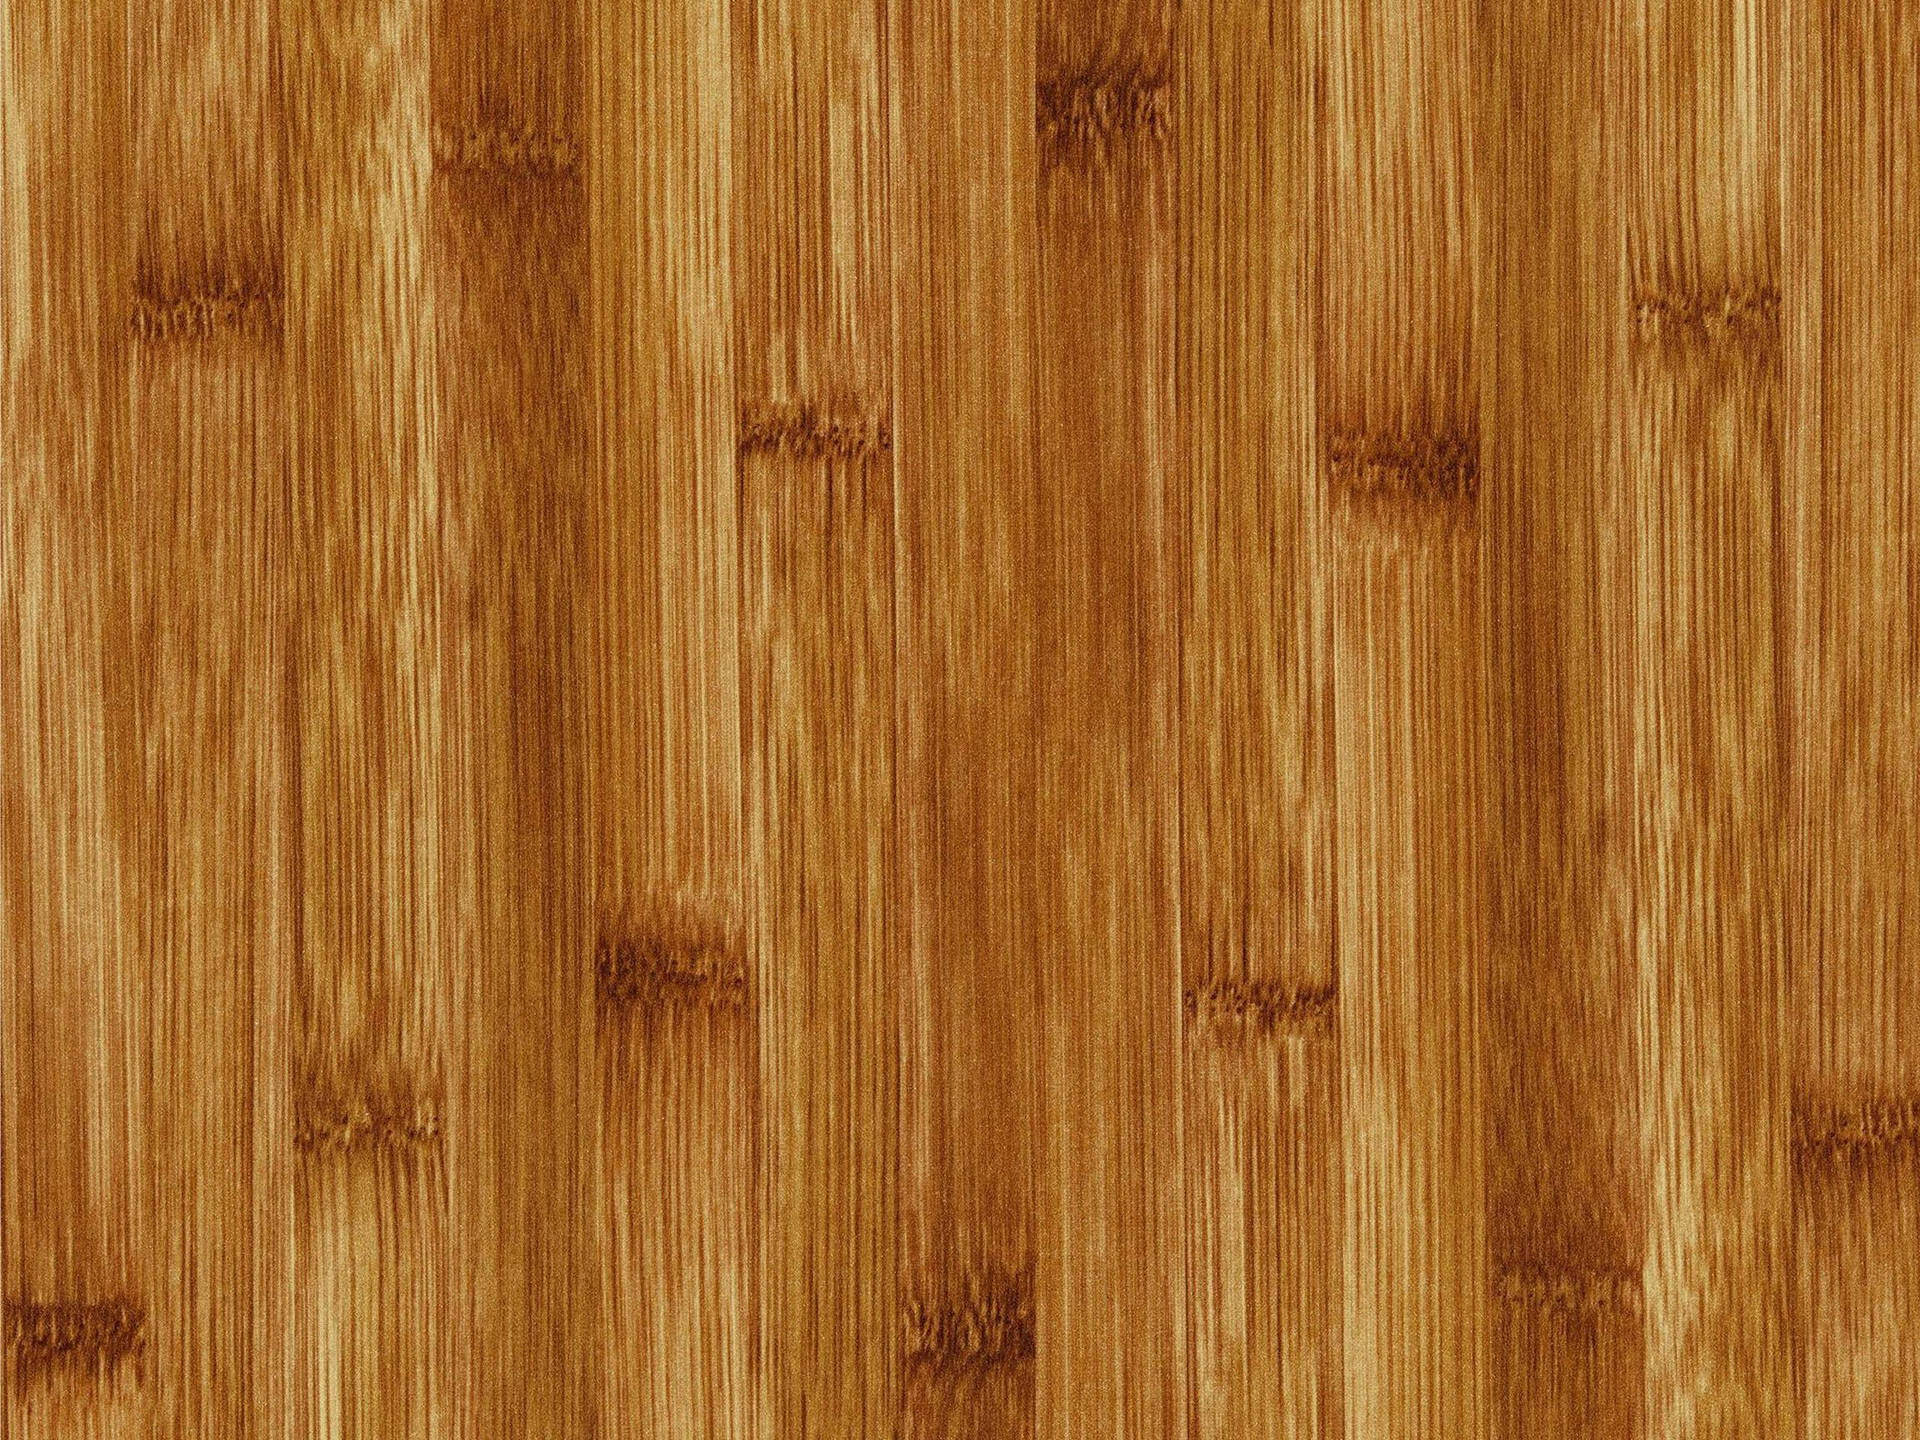 2304X1728 Wood Wallpaper and Background